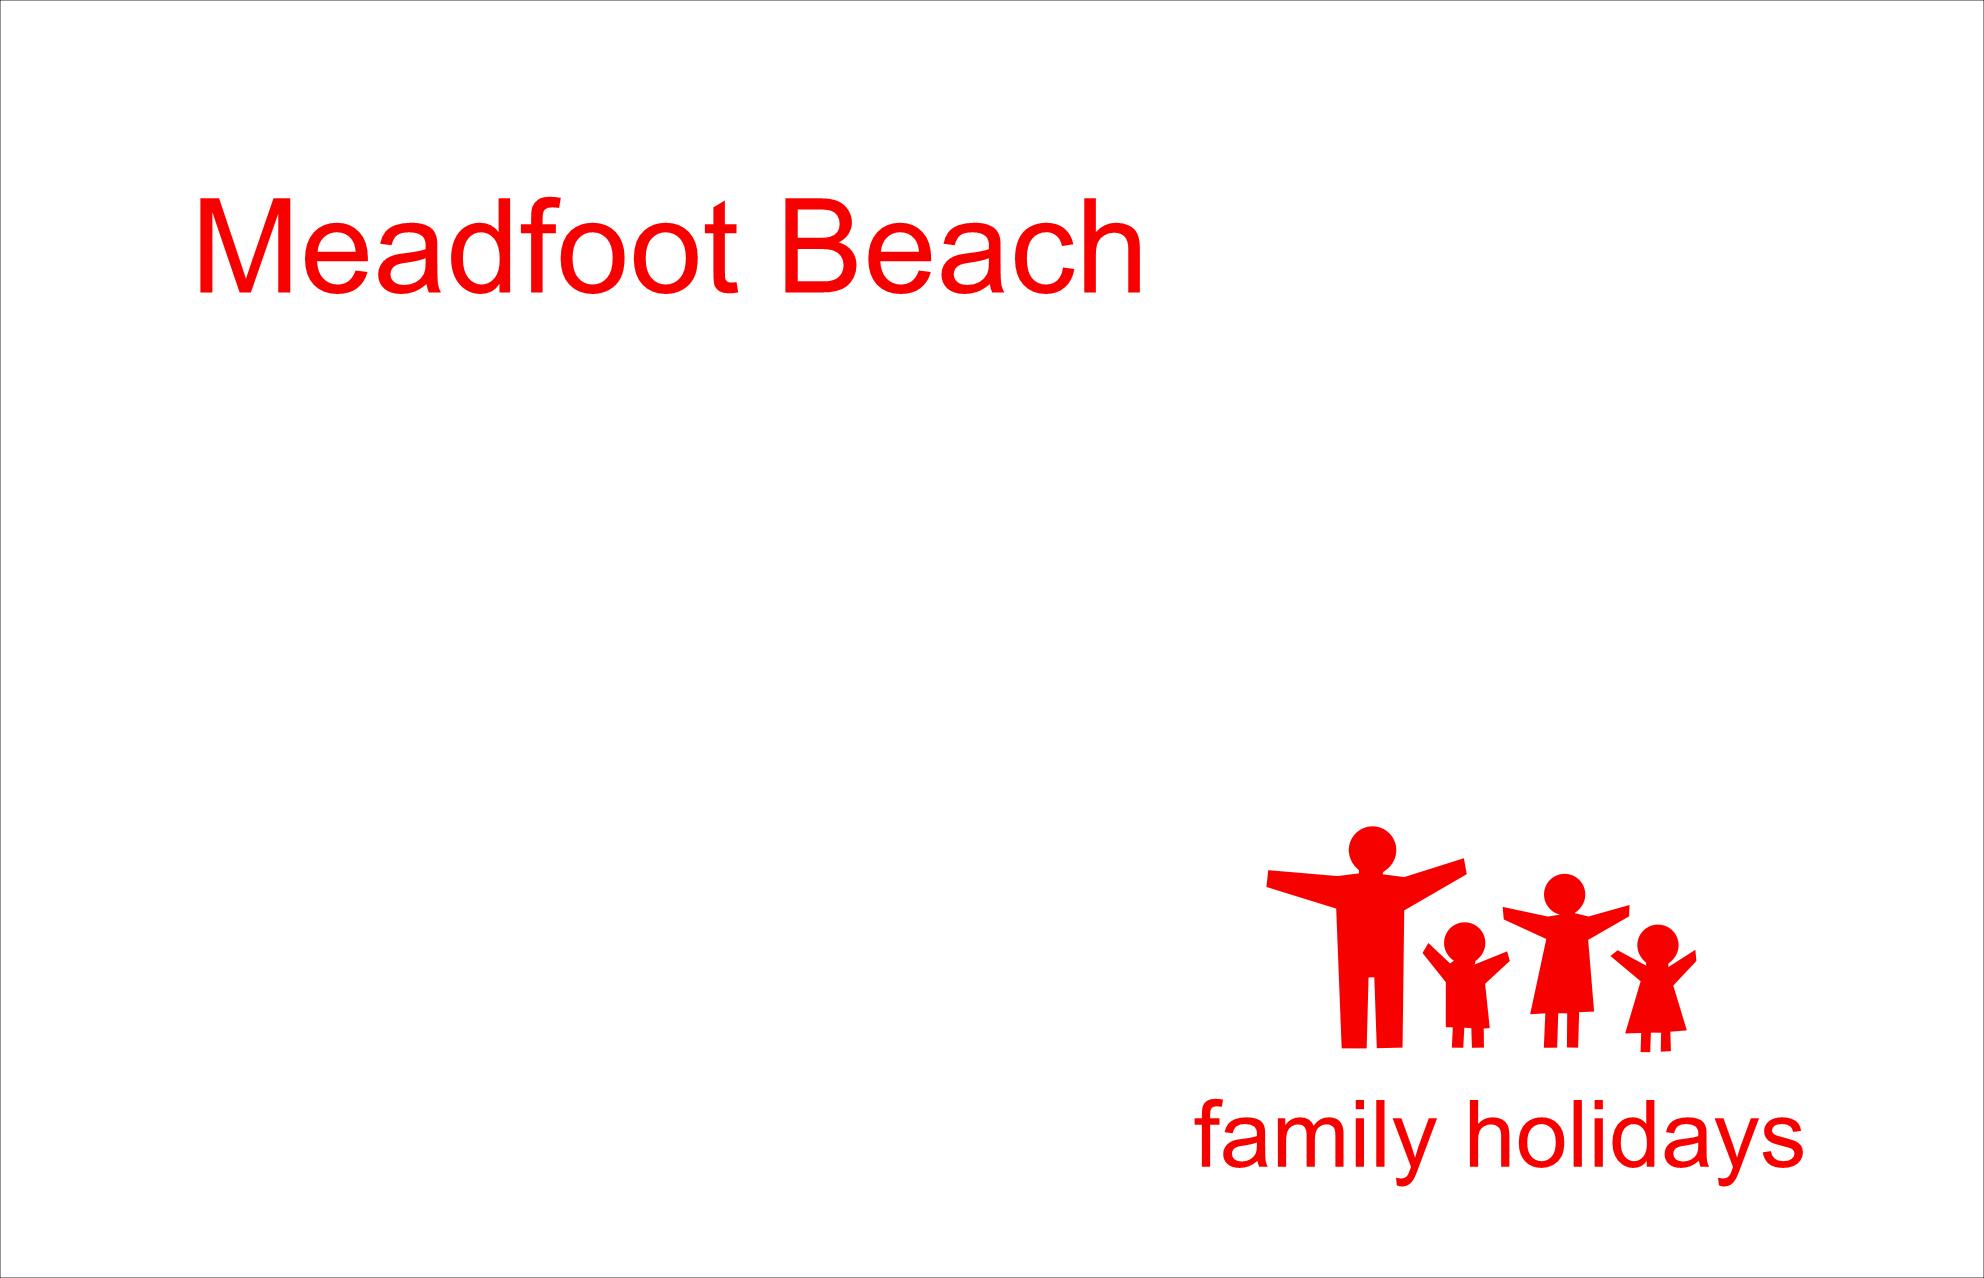 Meadfoot Beach, for family days out in Torquay. Things to do, and places to go for families in Torquay and around Torbay.